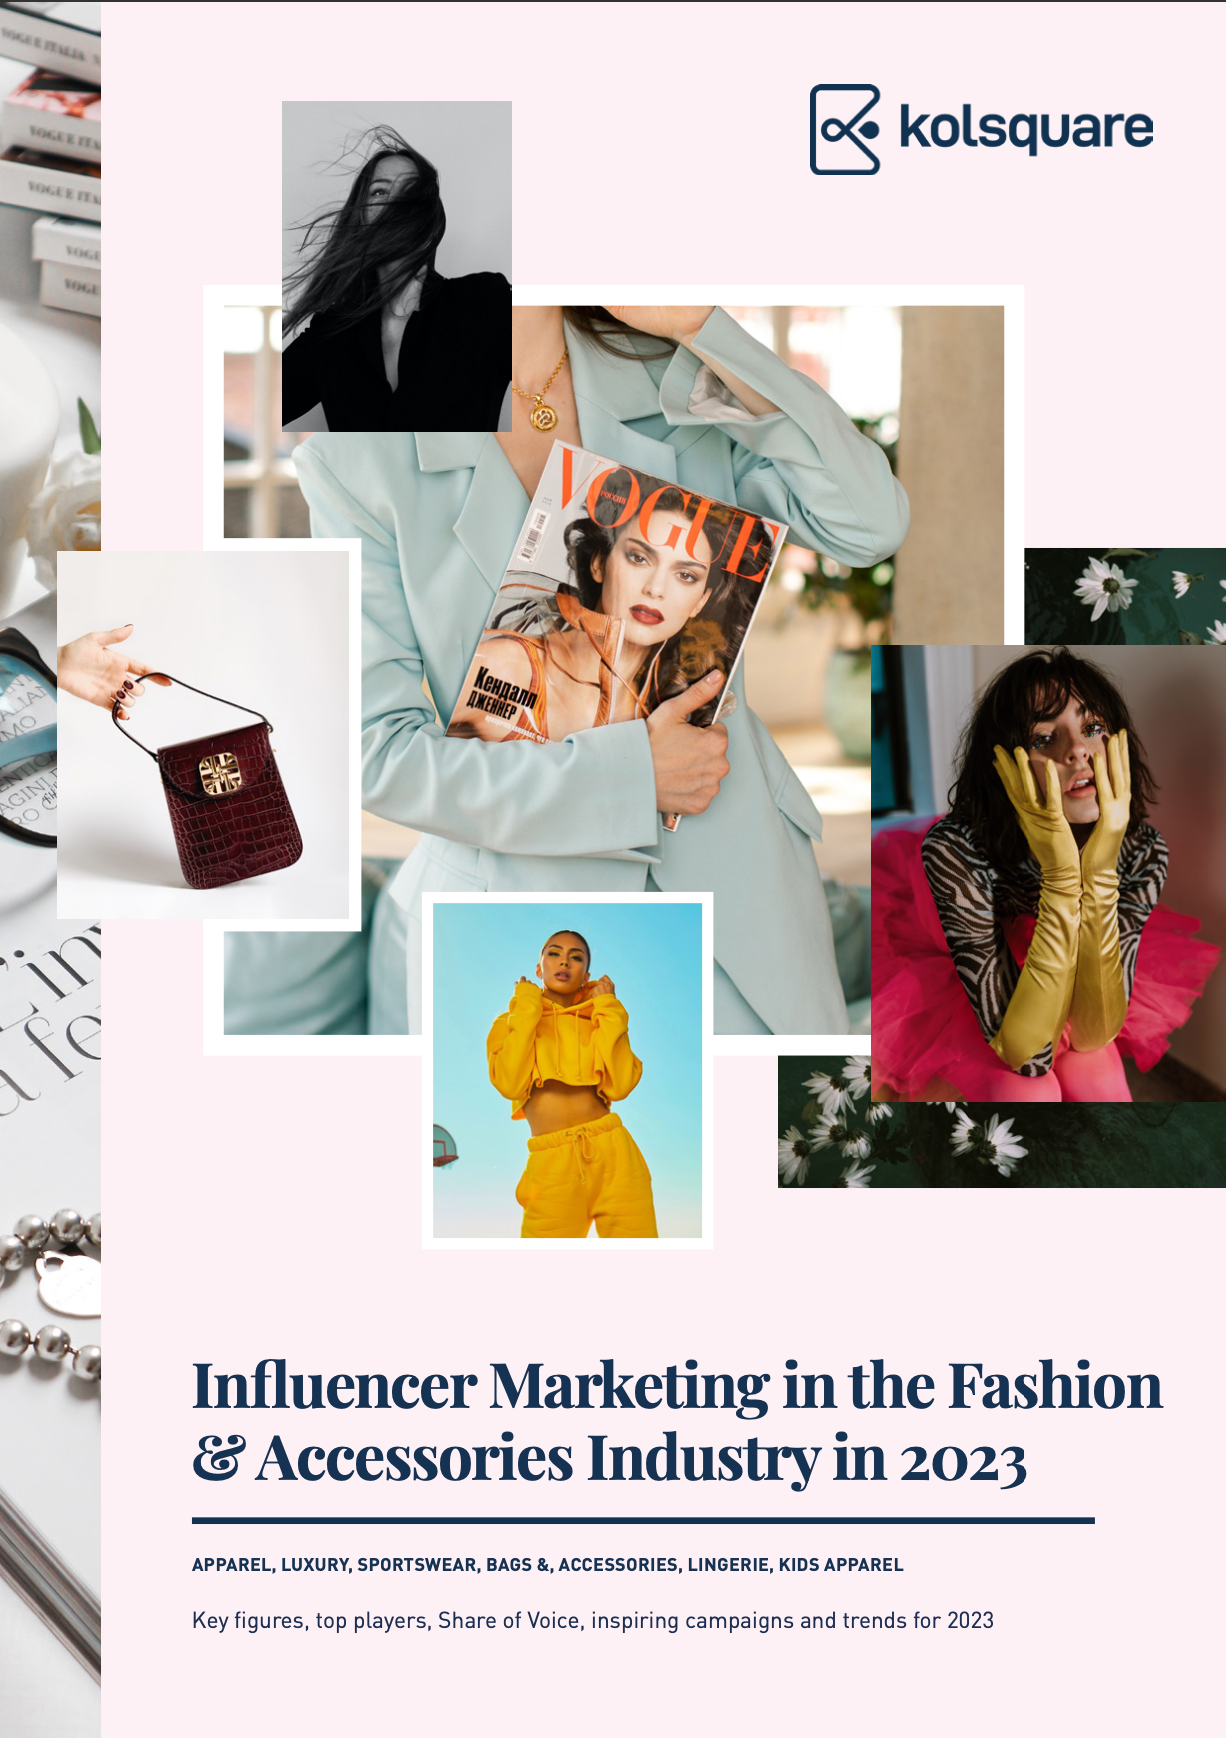 Influencer Marketing in the Fashion & Accessories Industry in 2023